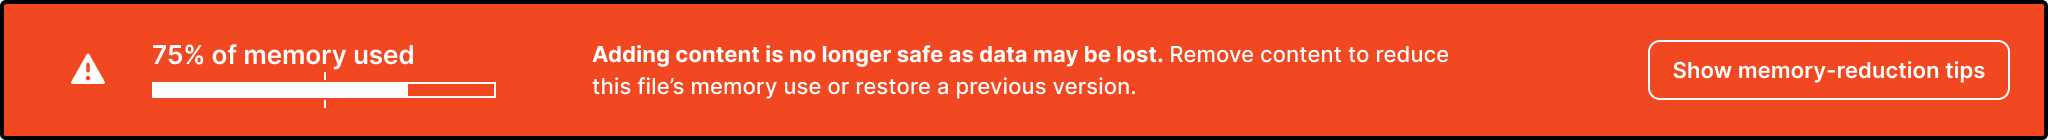 Adding content is no longer safe as data may be lost. Remove content to reduce this file’s memory use or restore a previous version.